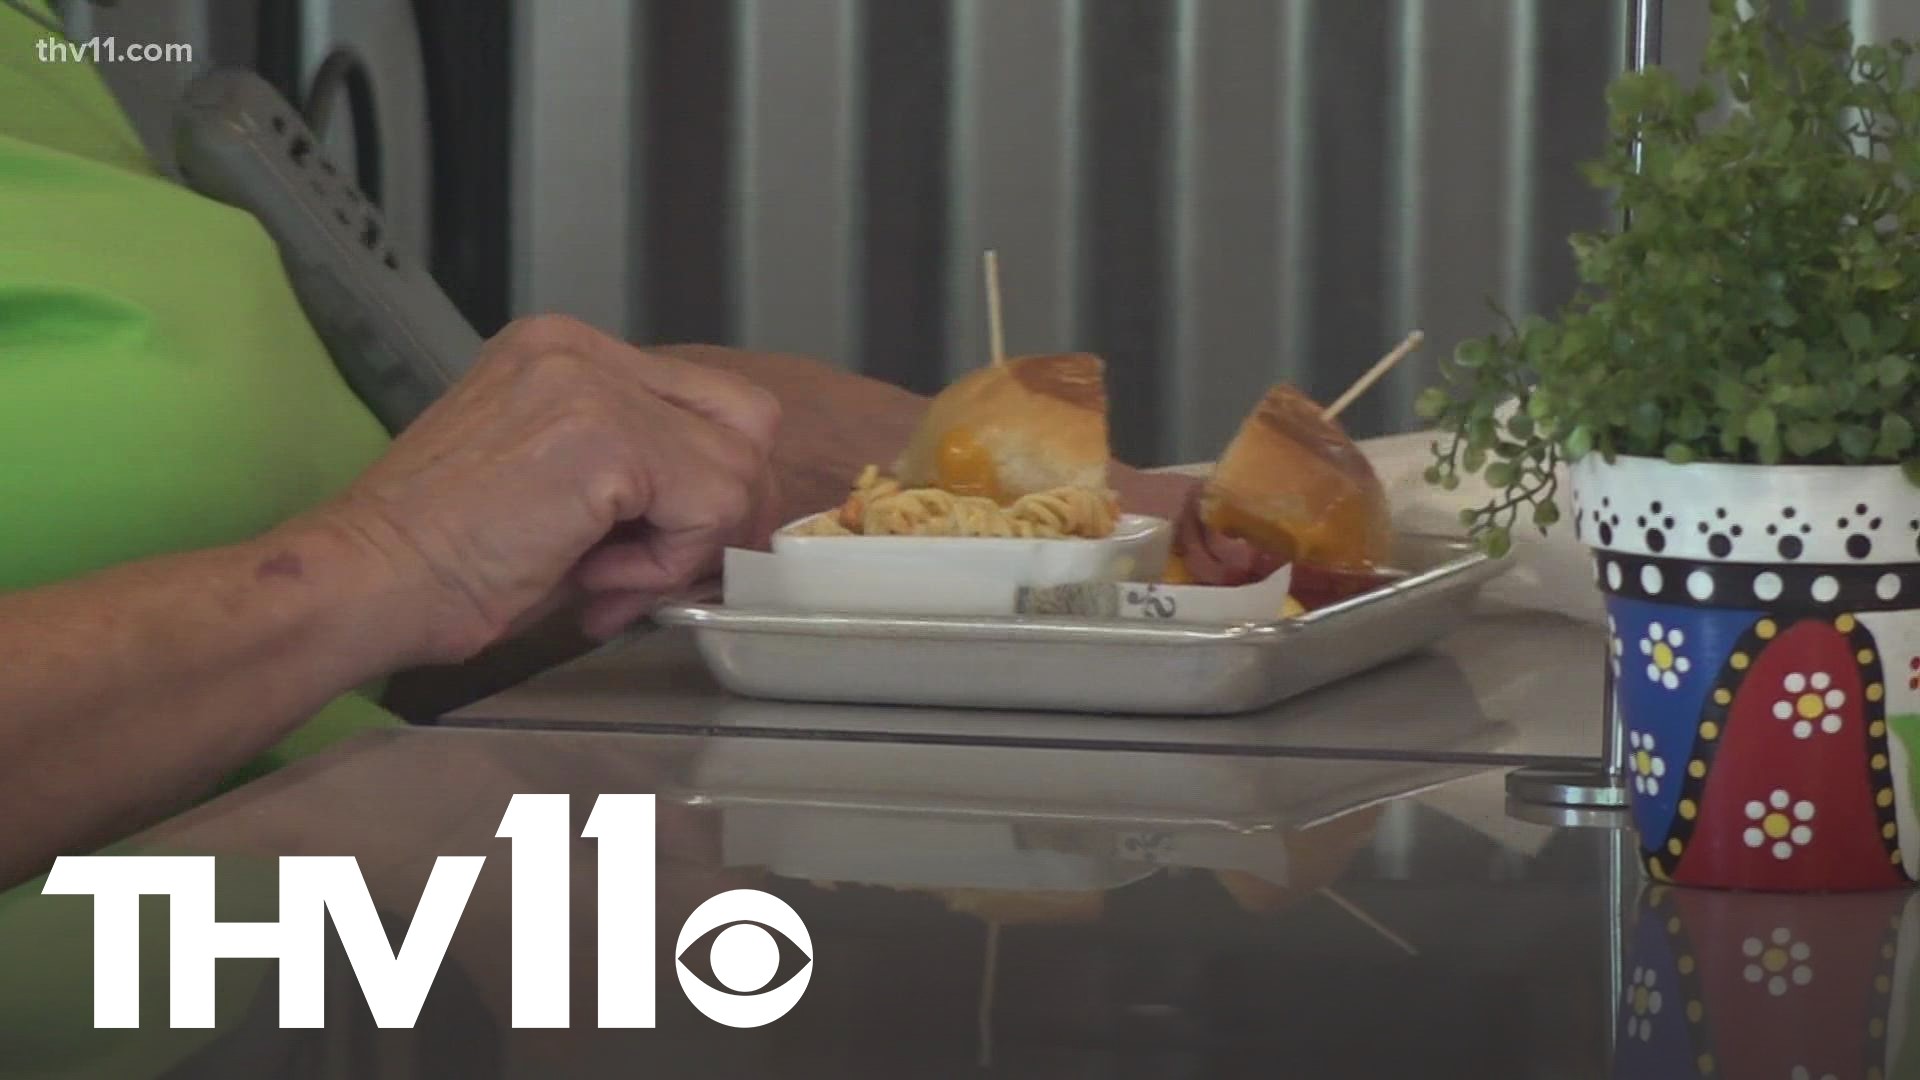 In an effort to reduce food waste, owners of an Arkansas restaurant have come up with a solution to get rid of leftovers without them going to waste.